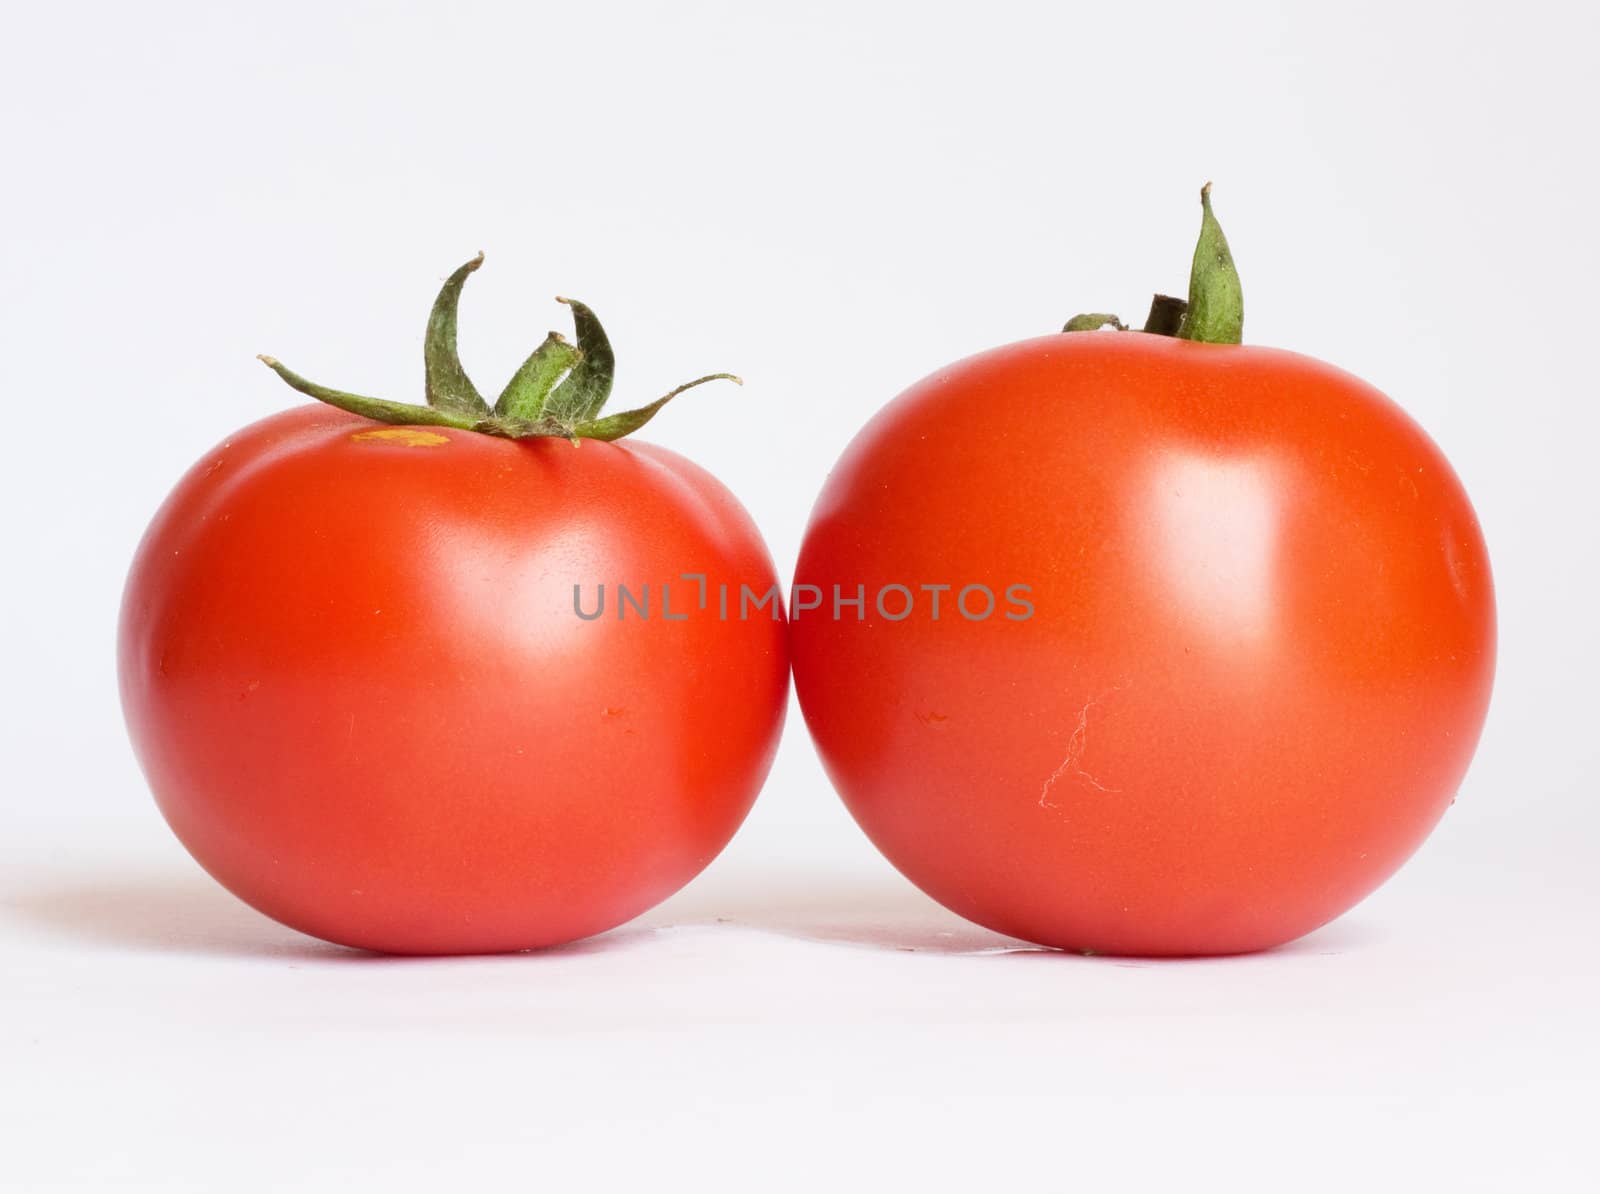 Two tomatoes isolated on white background 